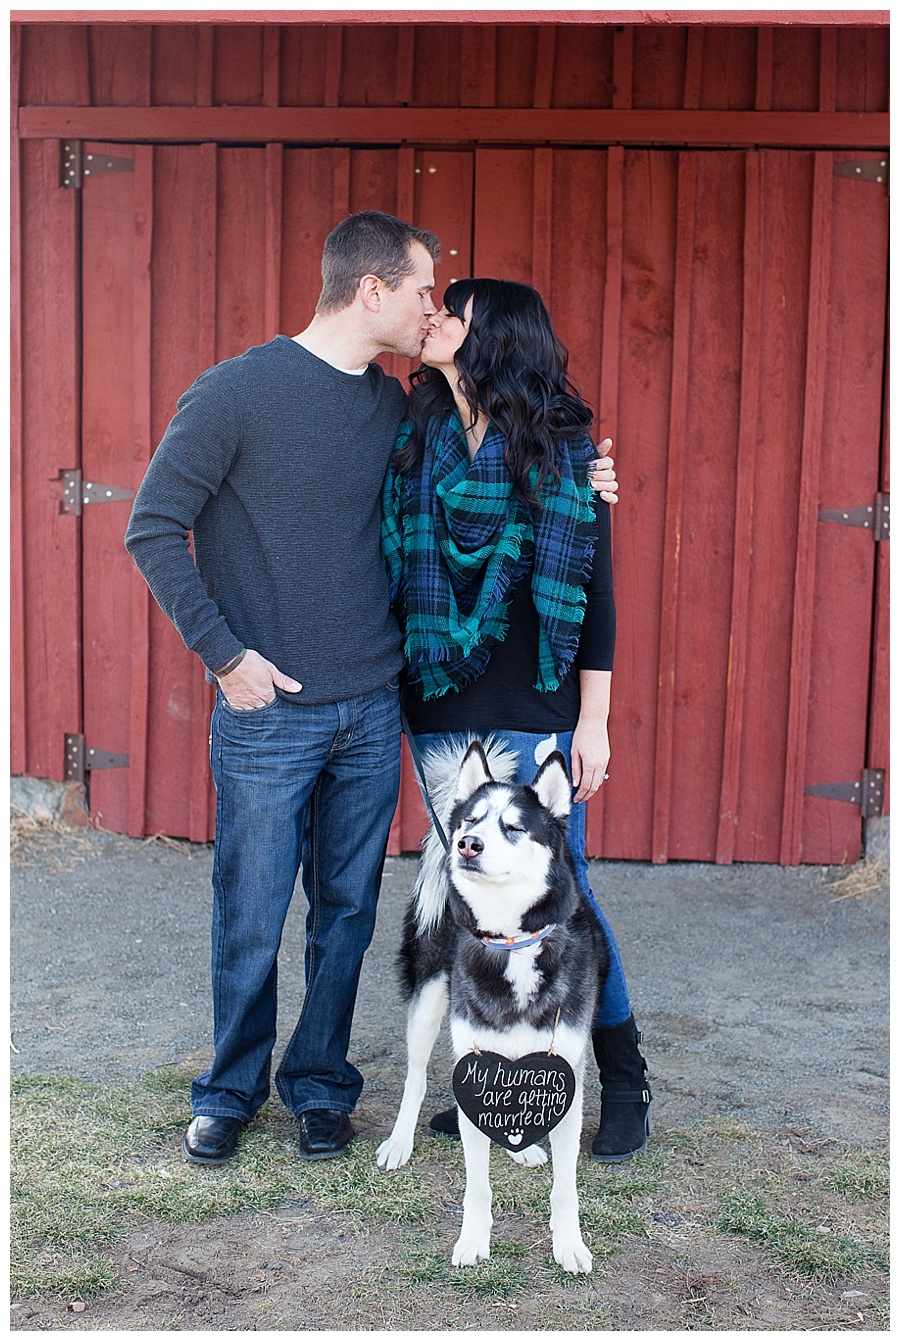 02 Cute engagement photos with dog